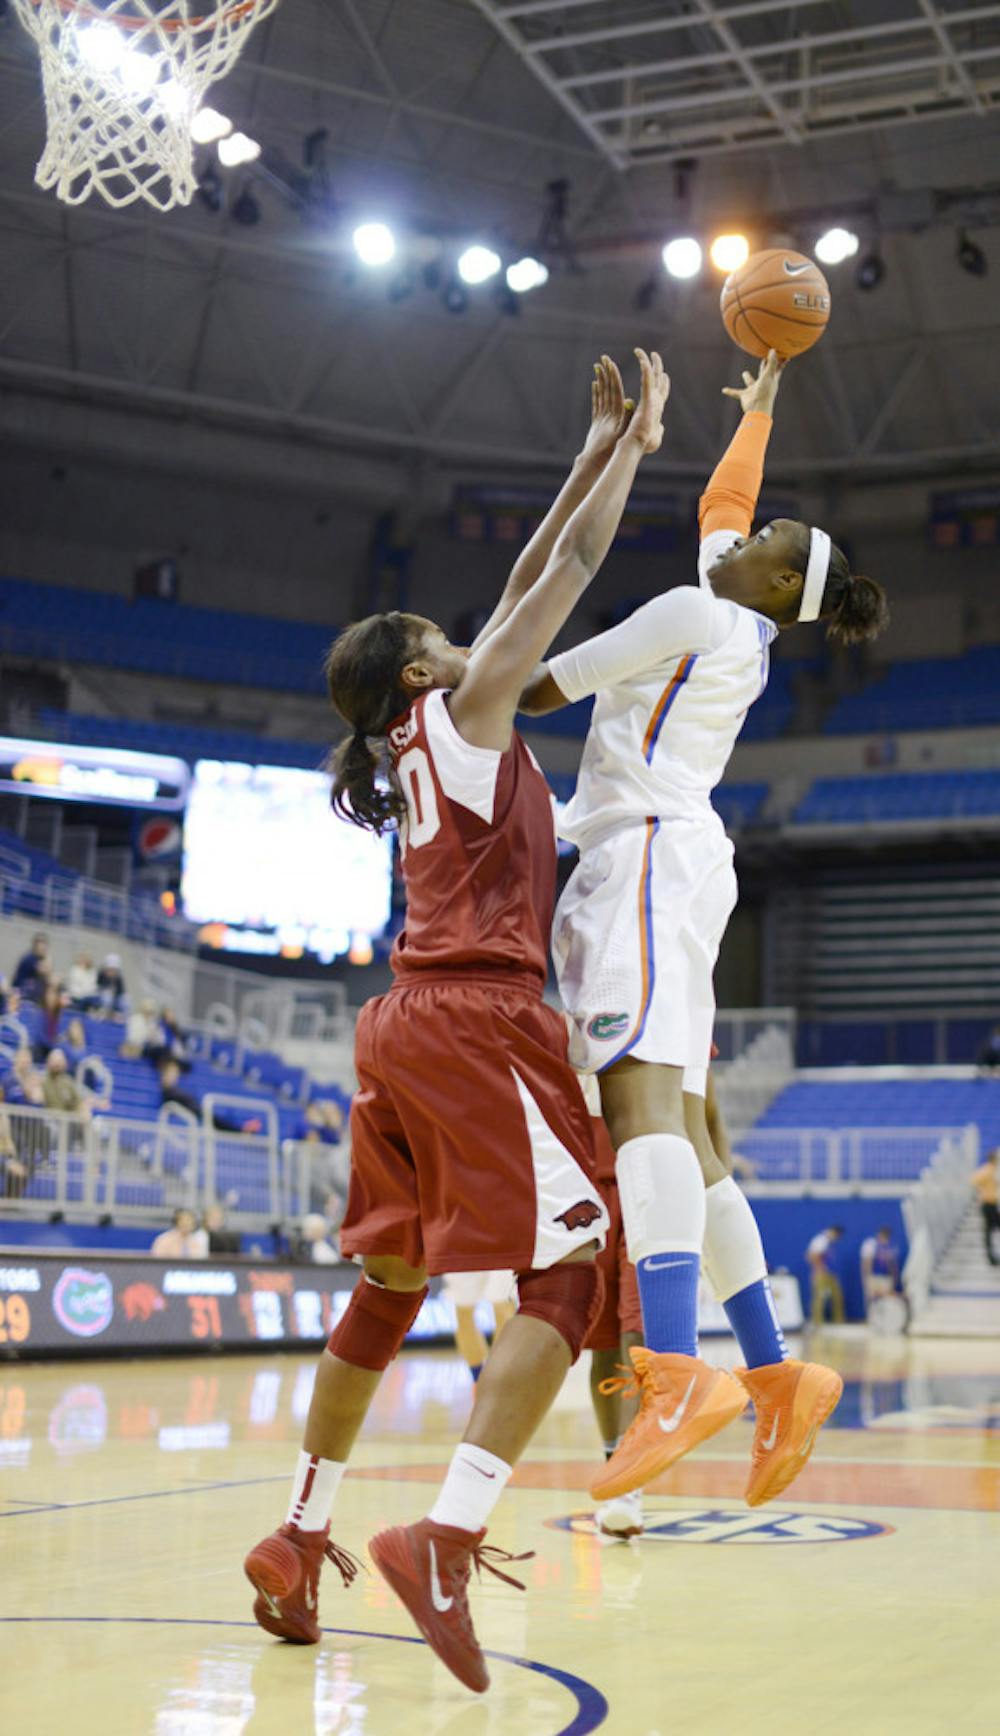 <p>Ronni Williams attempts a layup in Florida’s 59-52 win against Arkansas on Jan. 9 in the O’Connell Center. Williams fouled out for the 11th time this season on Sunday.</p>